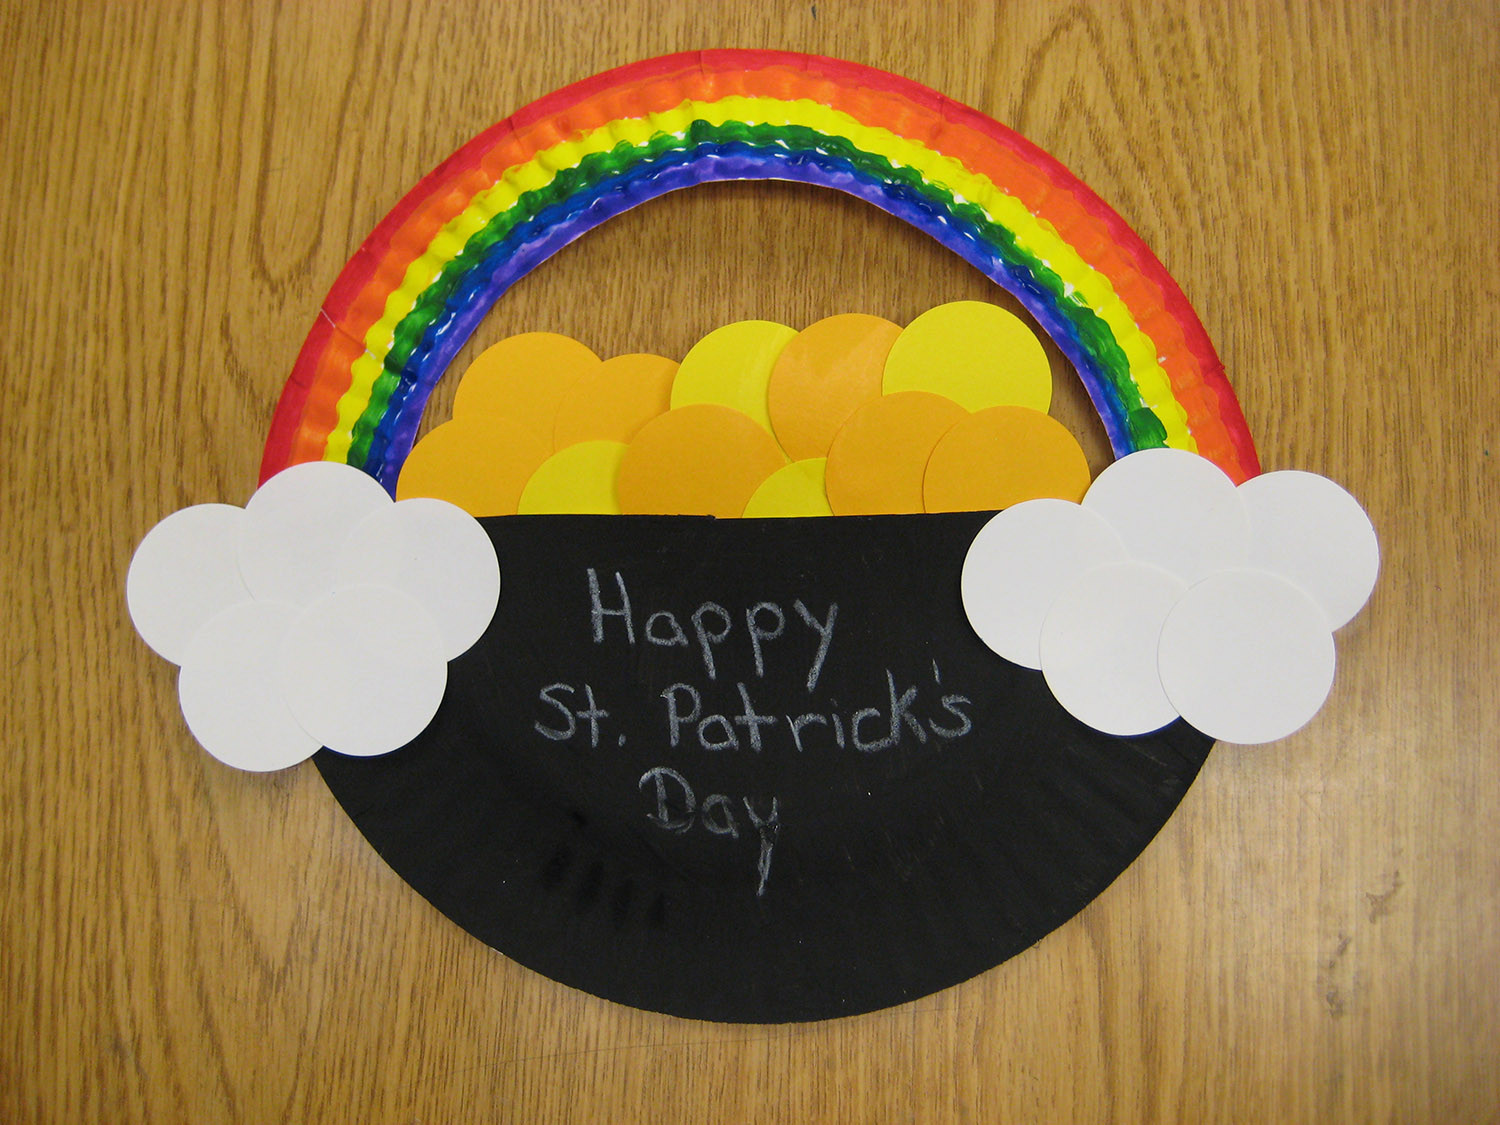 St Patrick Day Crafts For Preschoolers
 Pot o Gold Craft Project